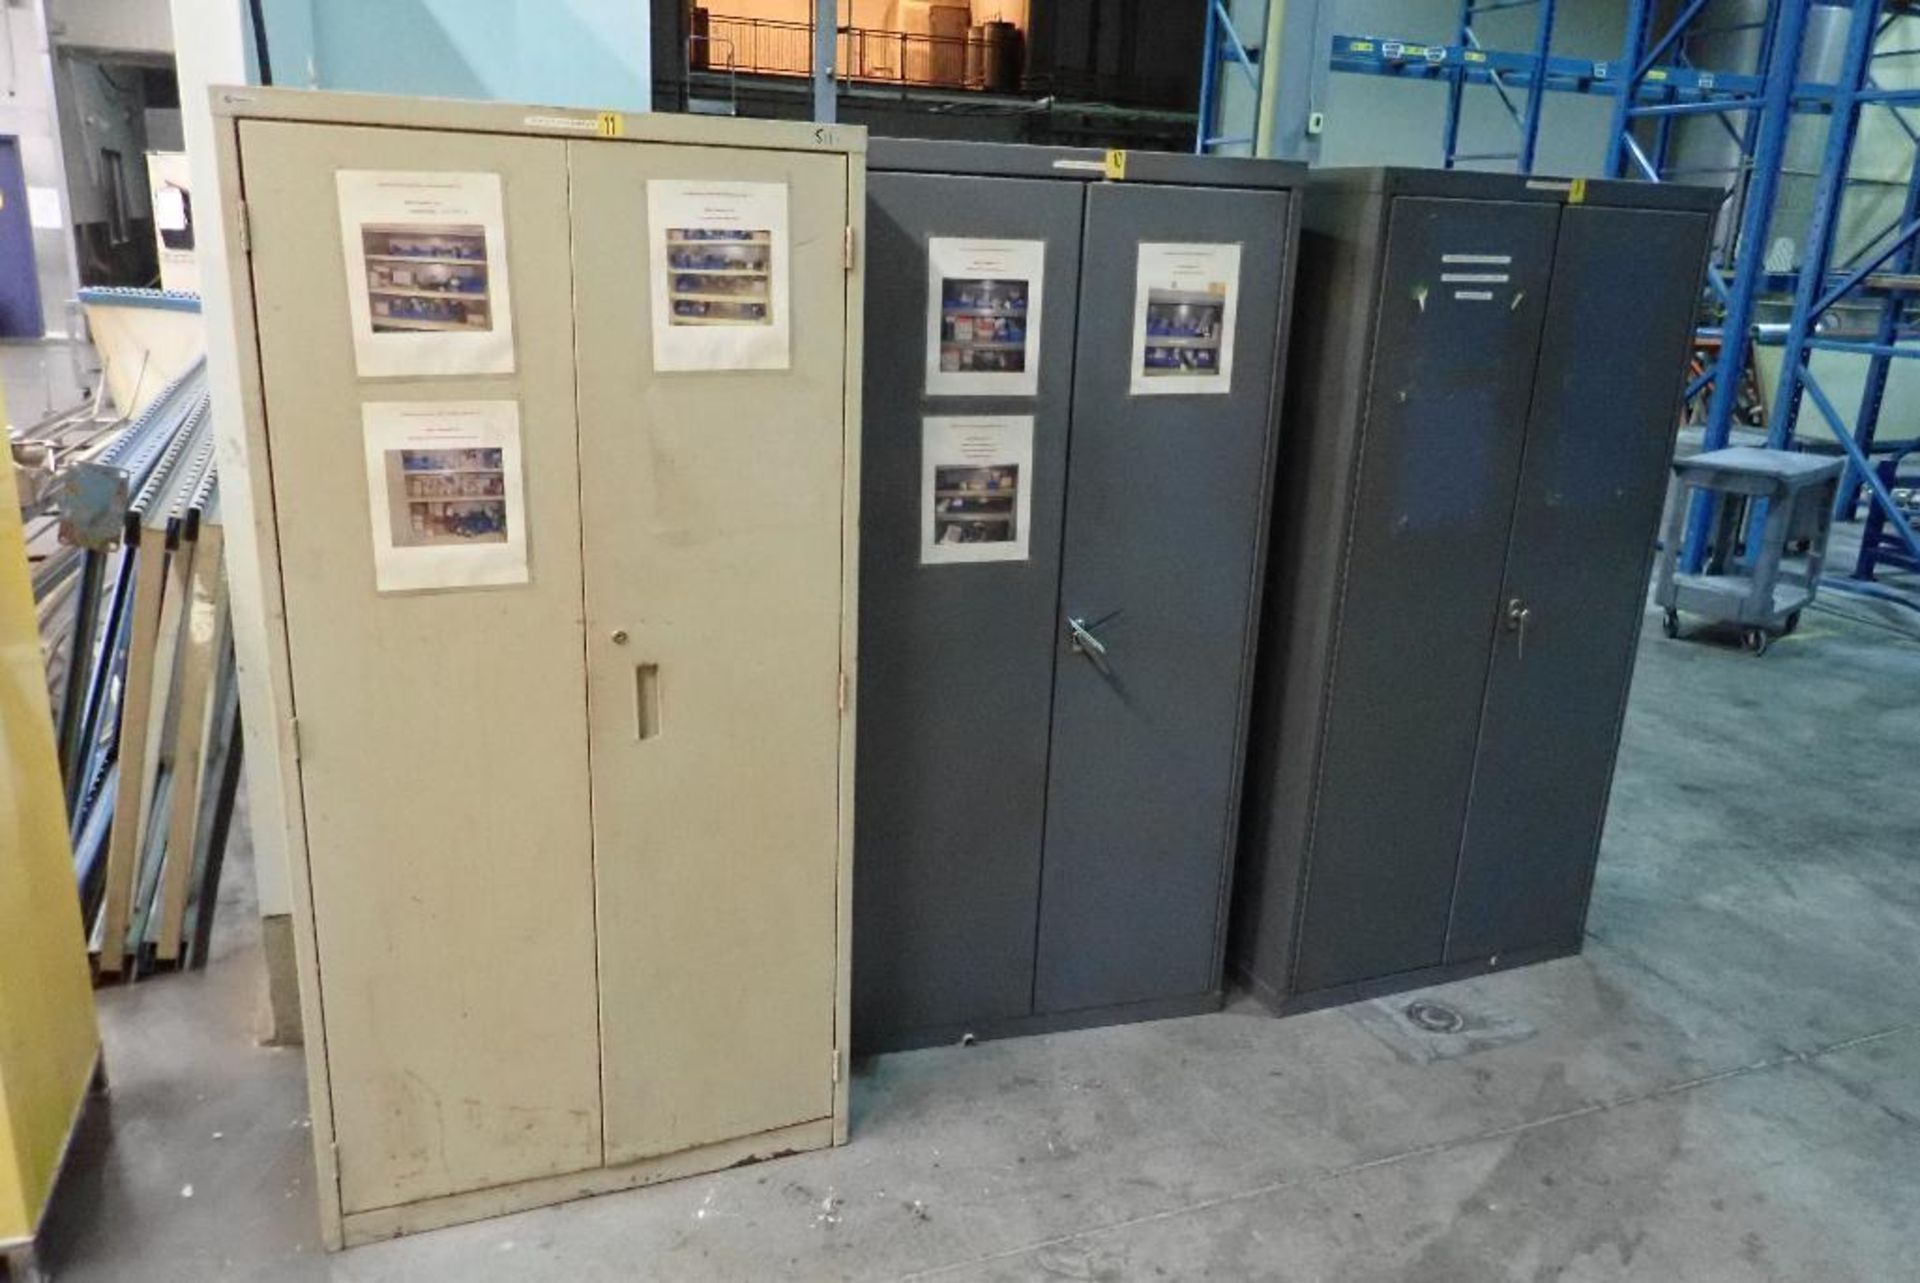 (4) mild steel 2-door cabinets and contents. **Rigging Fee: $150** (Located in Delta, BC Canada.)